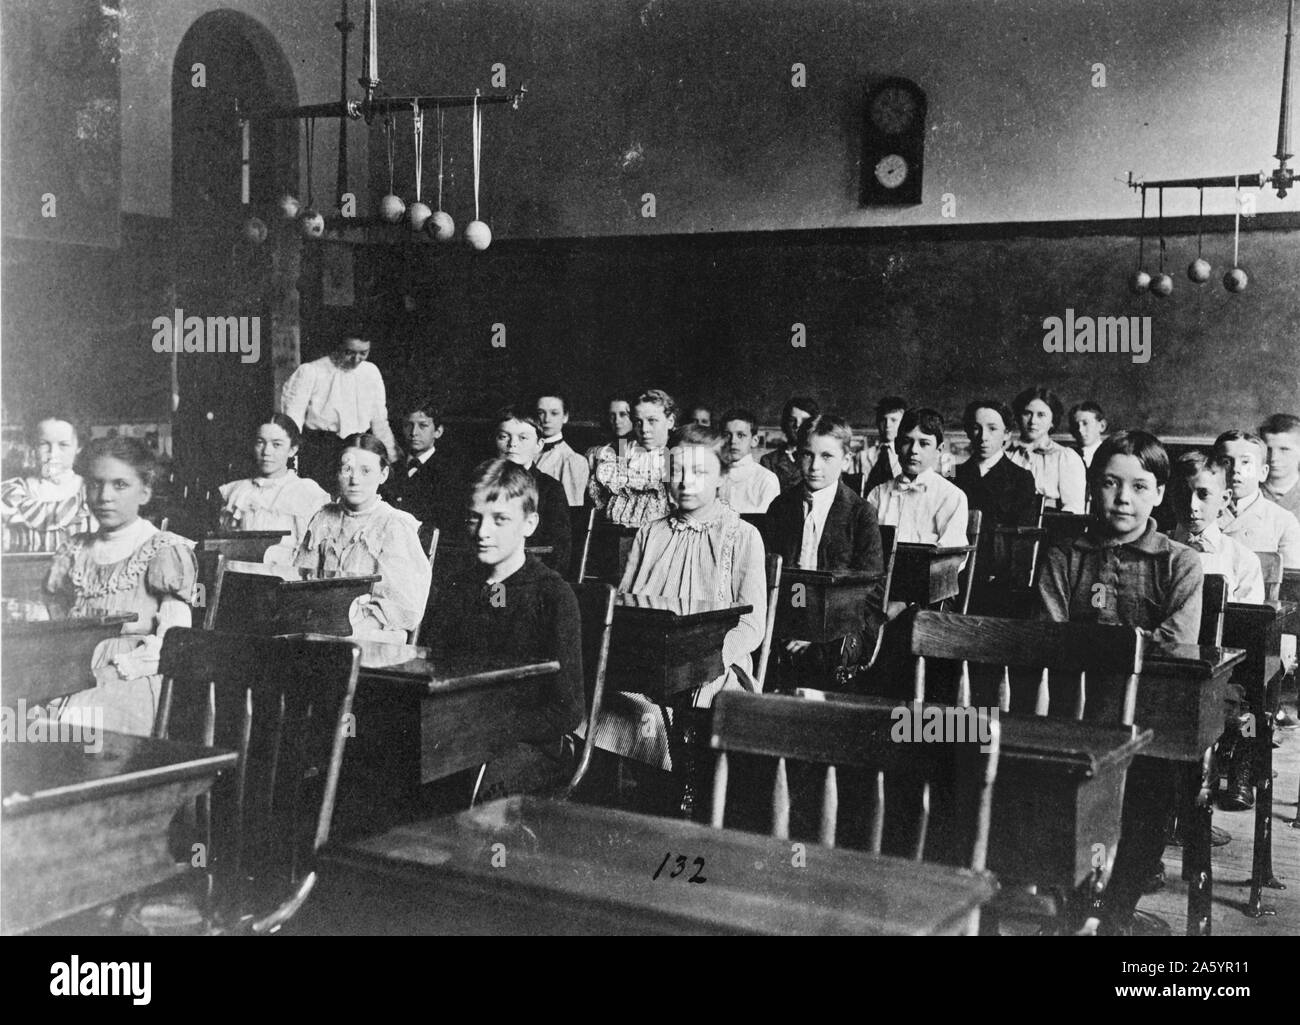 Boys and girls seated at desks in Washington, D.C. classroom 1899 Stock Photo